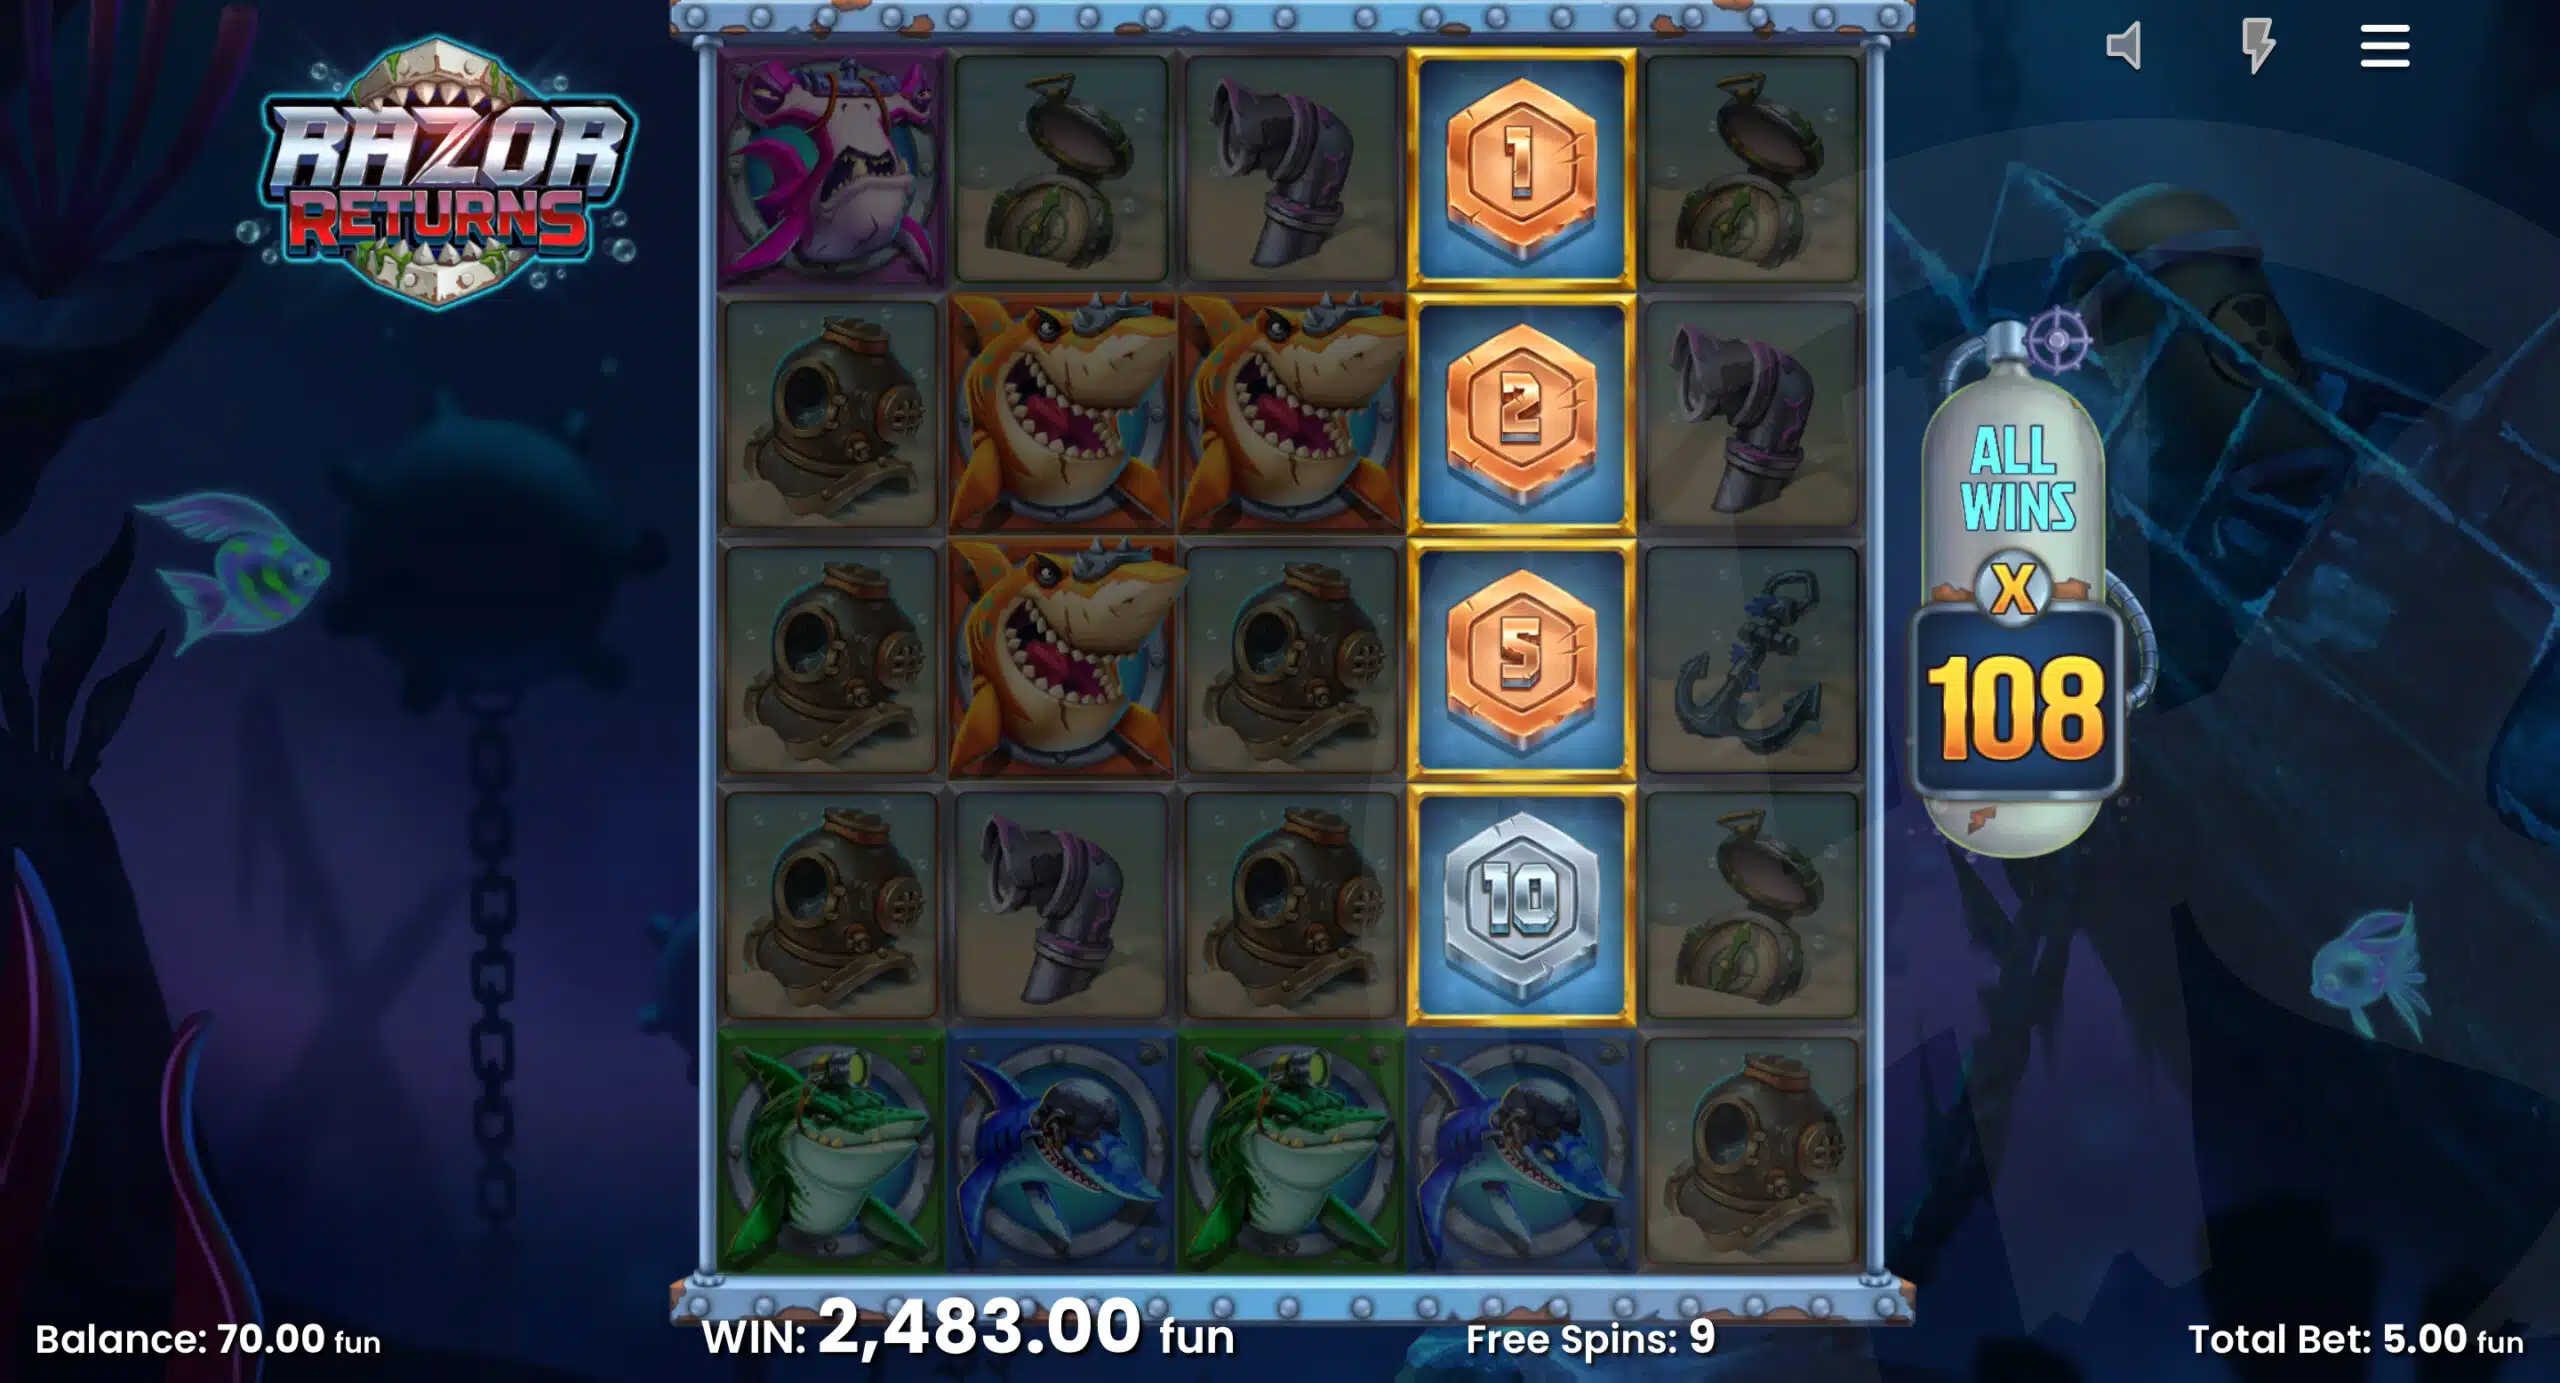 Free Spins Continue Until There are No Mystery Symbols in View